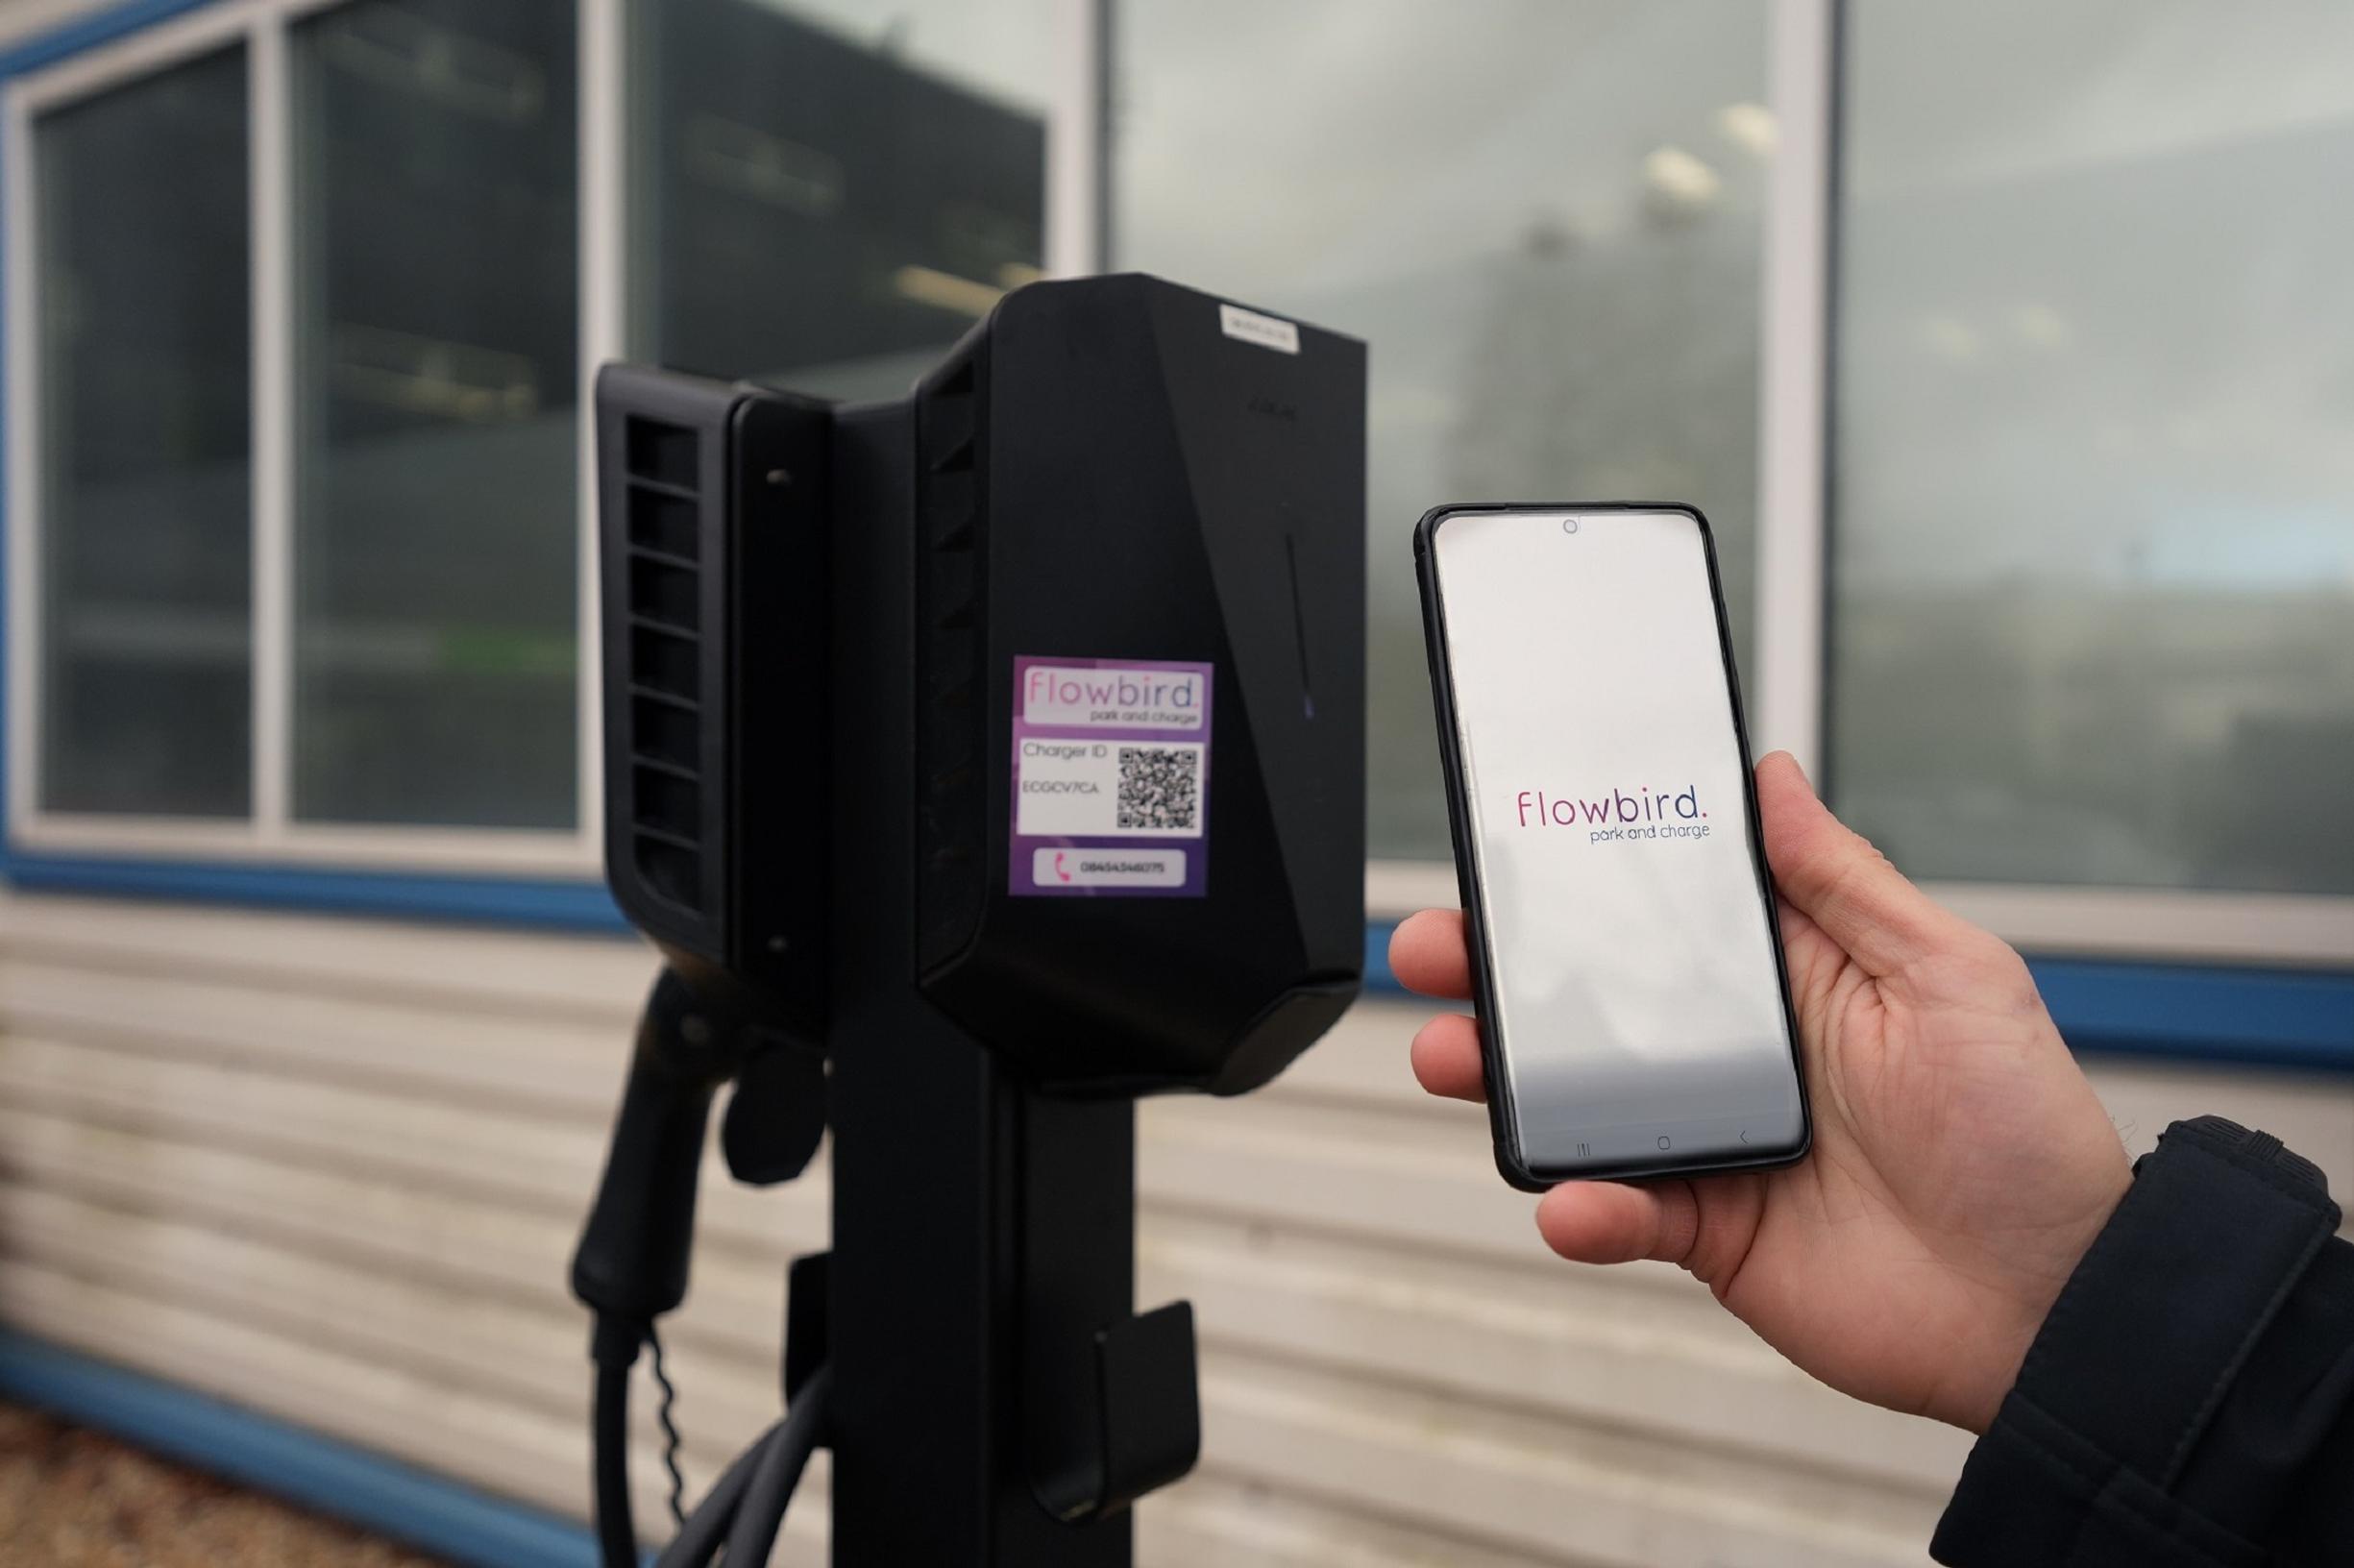 Flowbird UK has installed the first electric vehicle chargepoint hub for Waitrose employees at the retailer’s main distribution centre in Bracknell